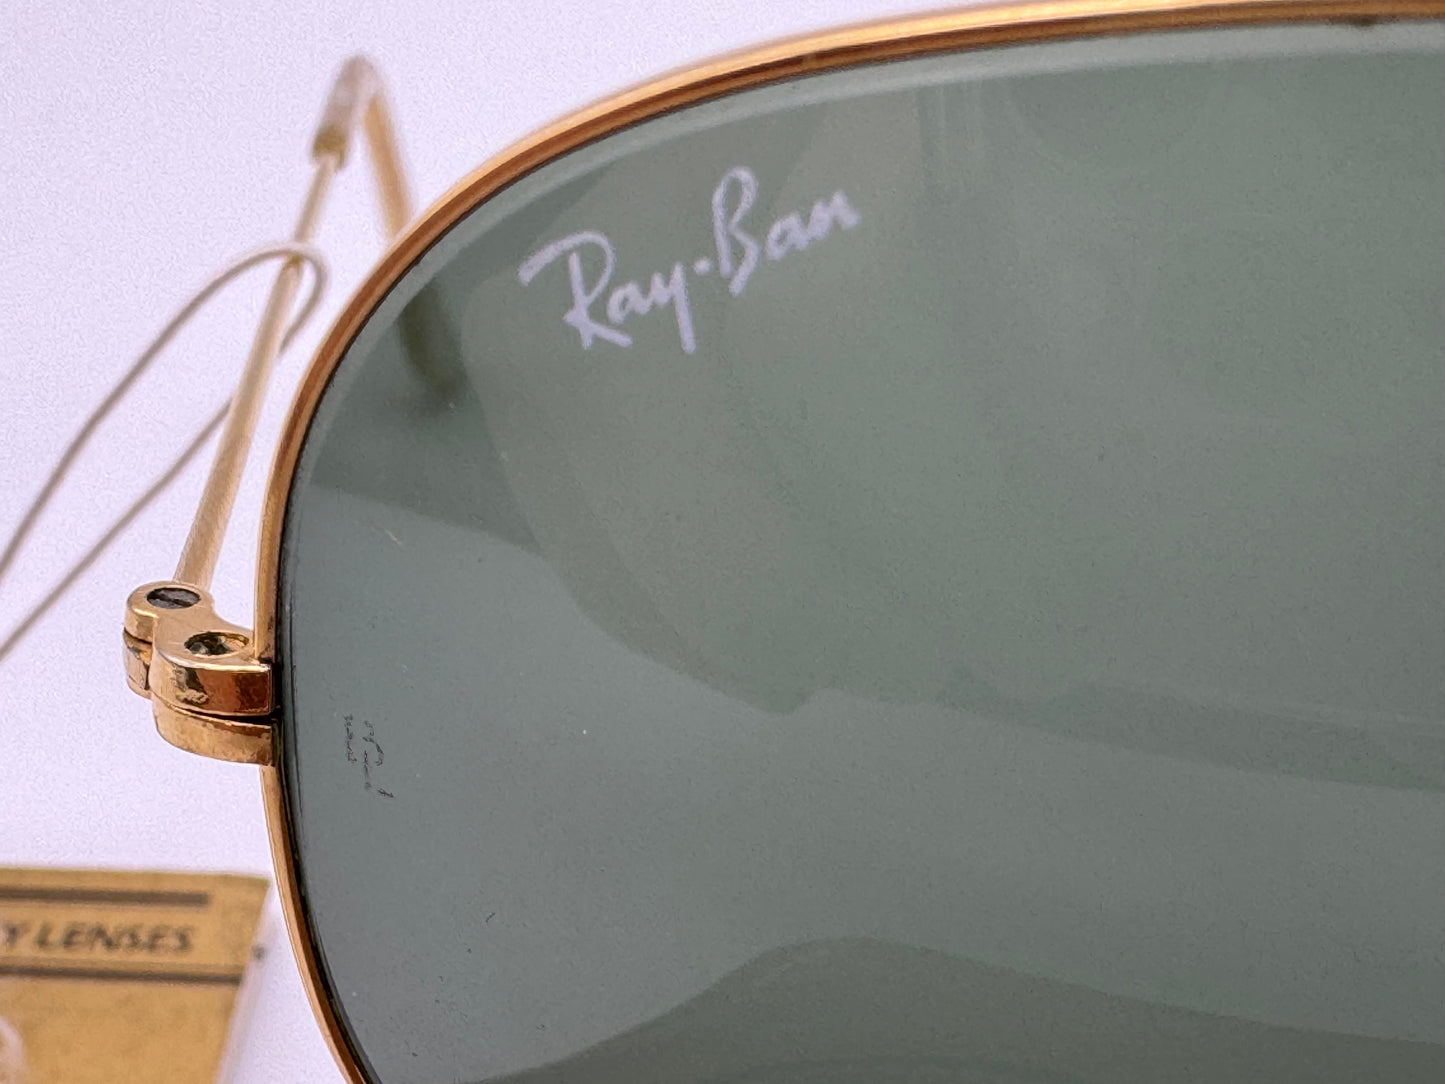 Ray Ban B&L Vintage Aviator 58mm Gold Glass G-15 Great Condition Preowned